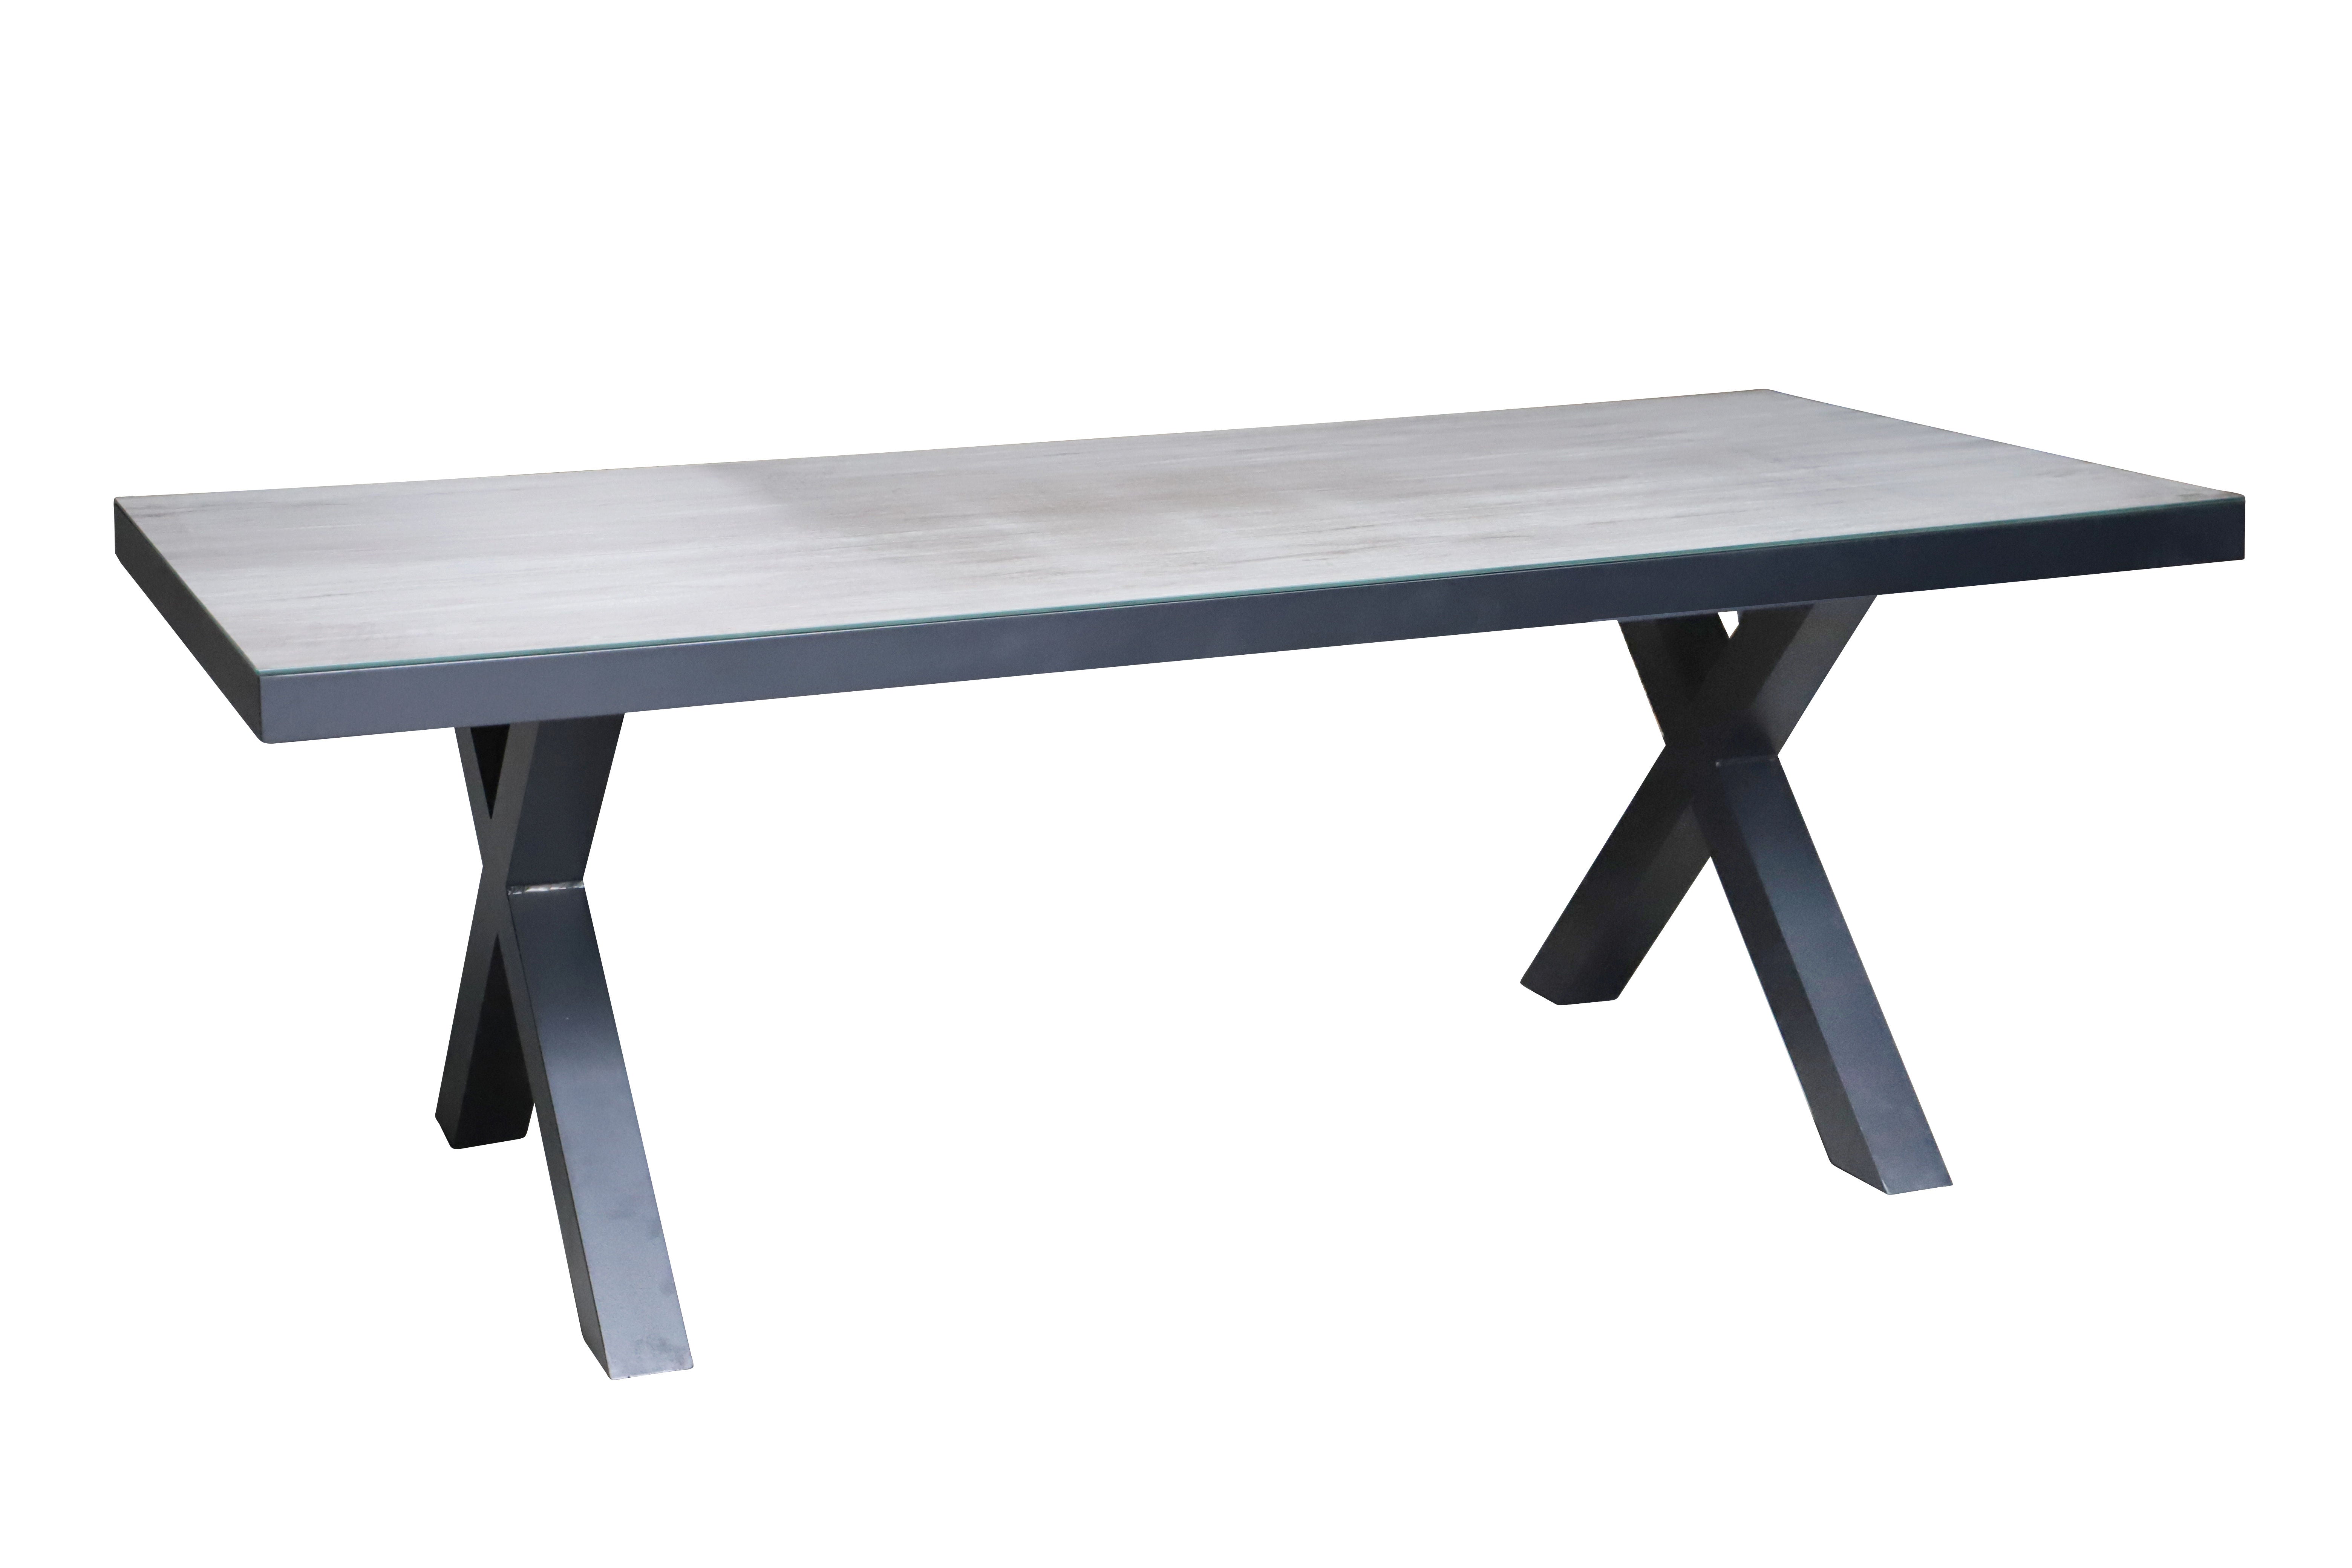 MOSS MOSS-0936GN - Carolina Collection, Rectangular dining table with 5 mm grey-brown wood effect 3d printing glass and aluminum structure with crossed legs 78,7" x 39,4" x H29,1" (2 boxes)